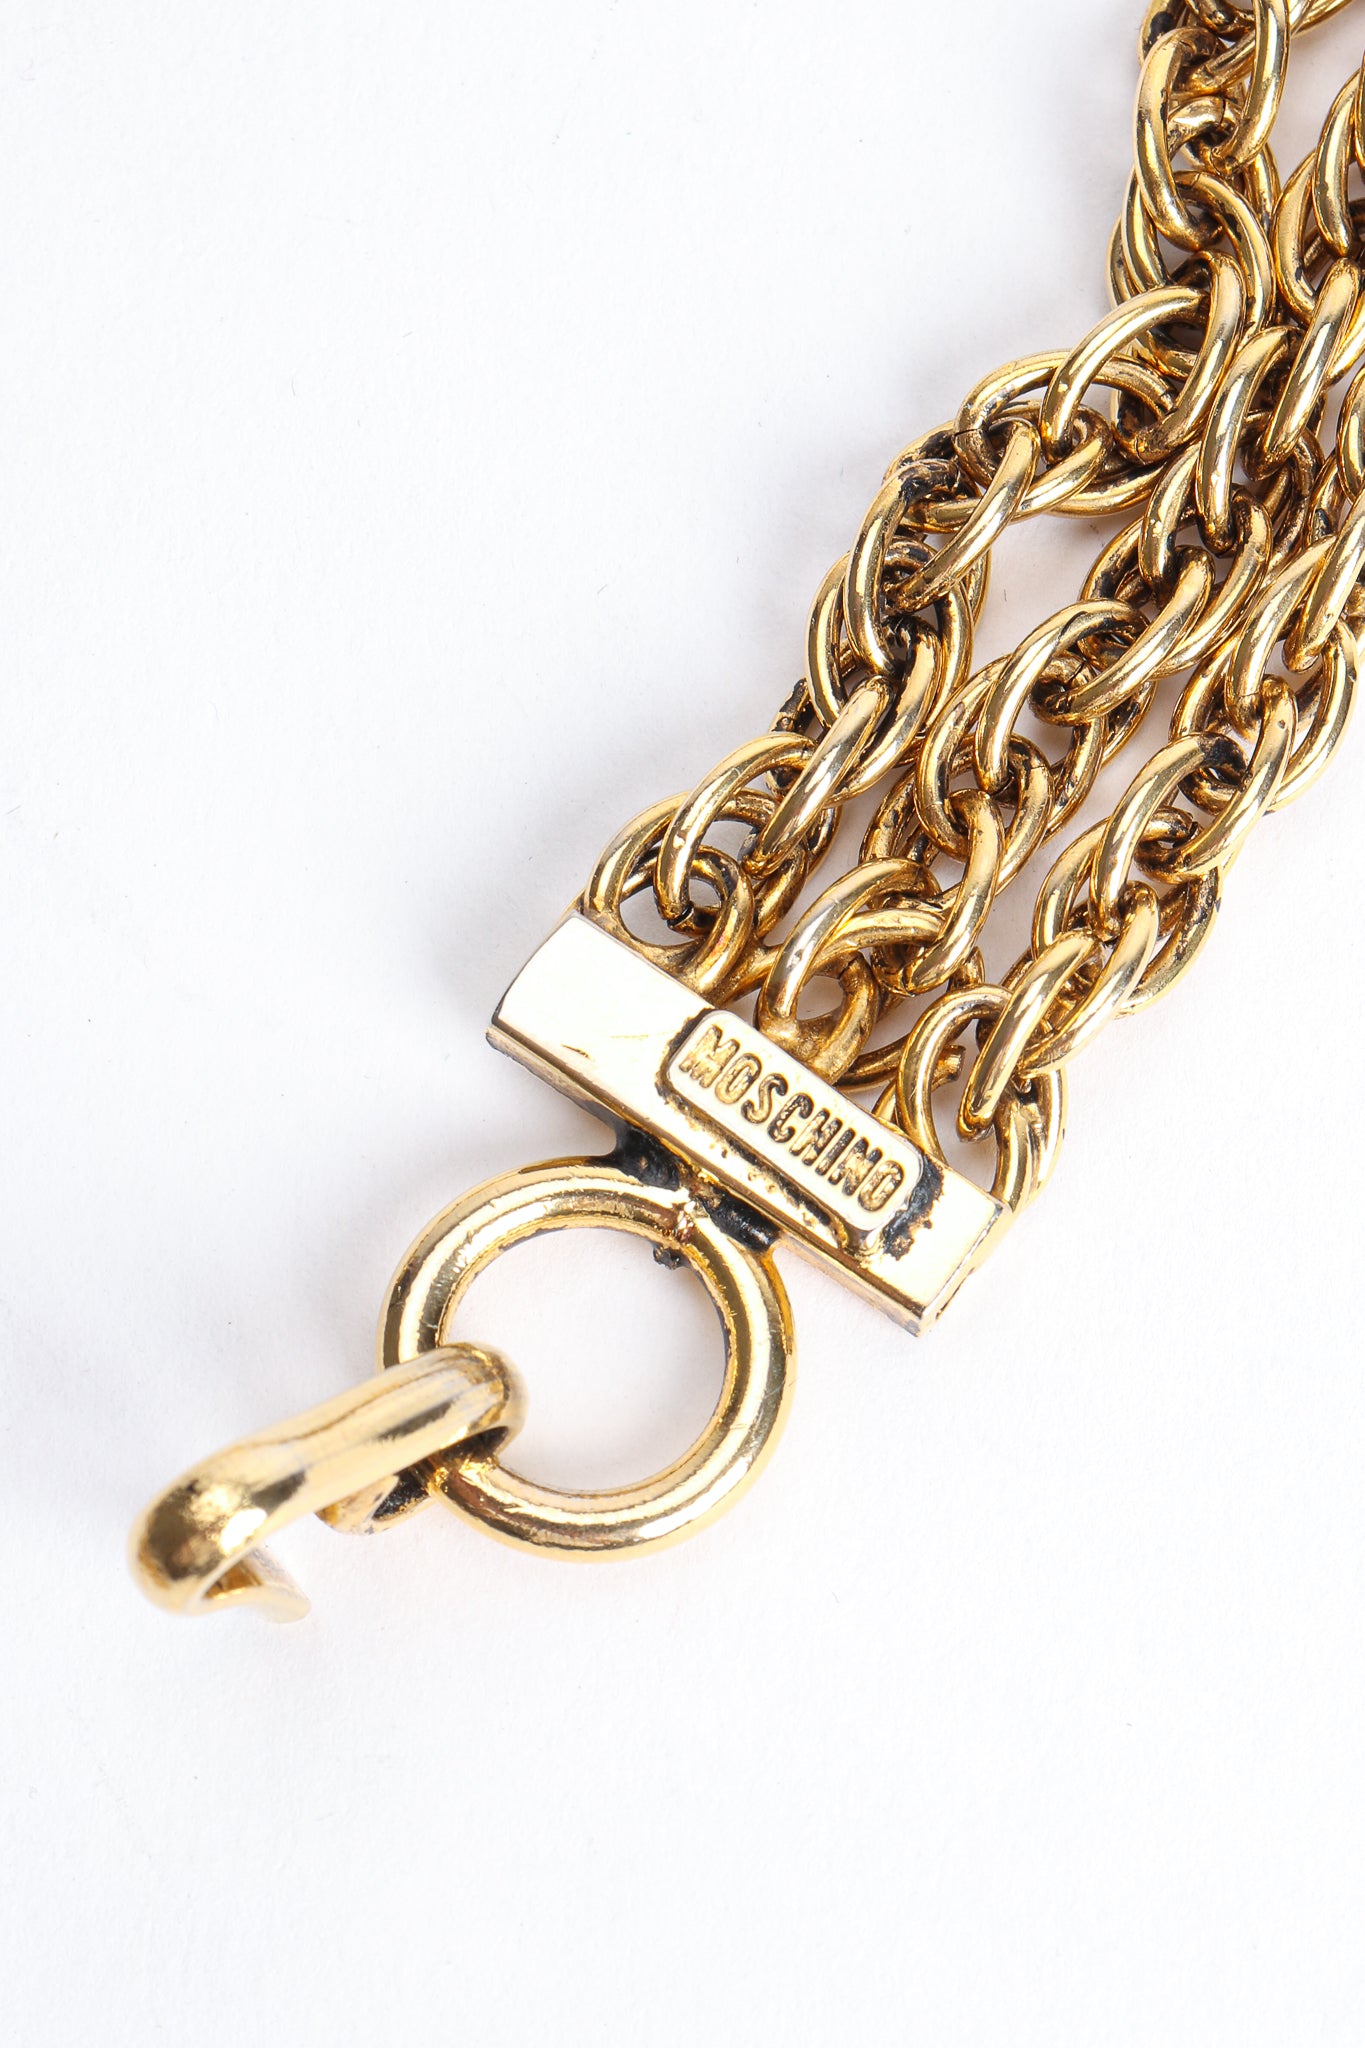 Vintage Moschino Gold Tassel Chain Belt Necklace Signature Cartouche at Recess Los Angeles